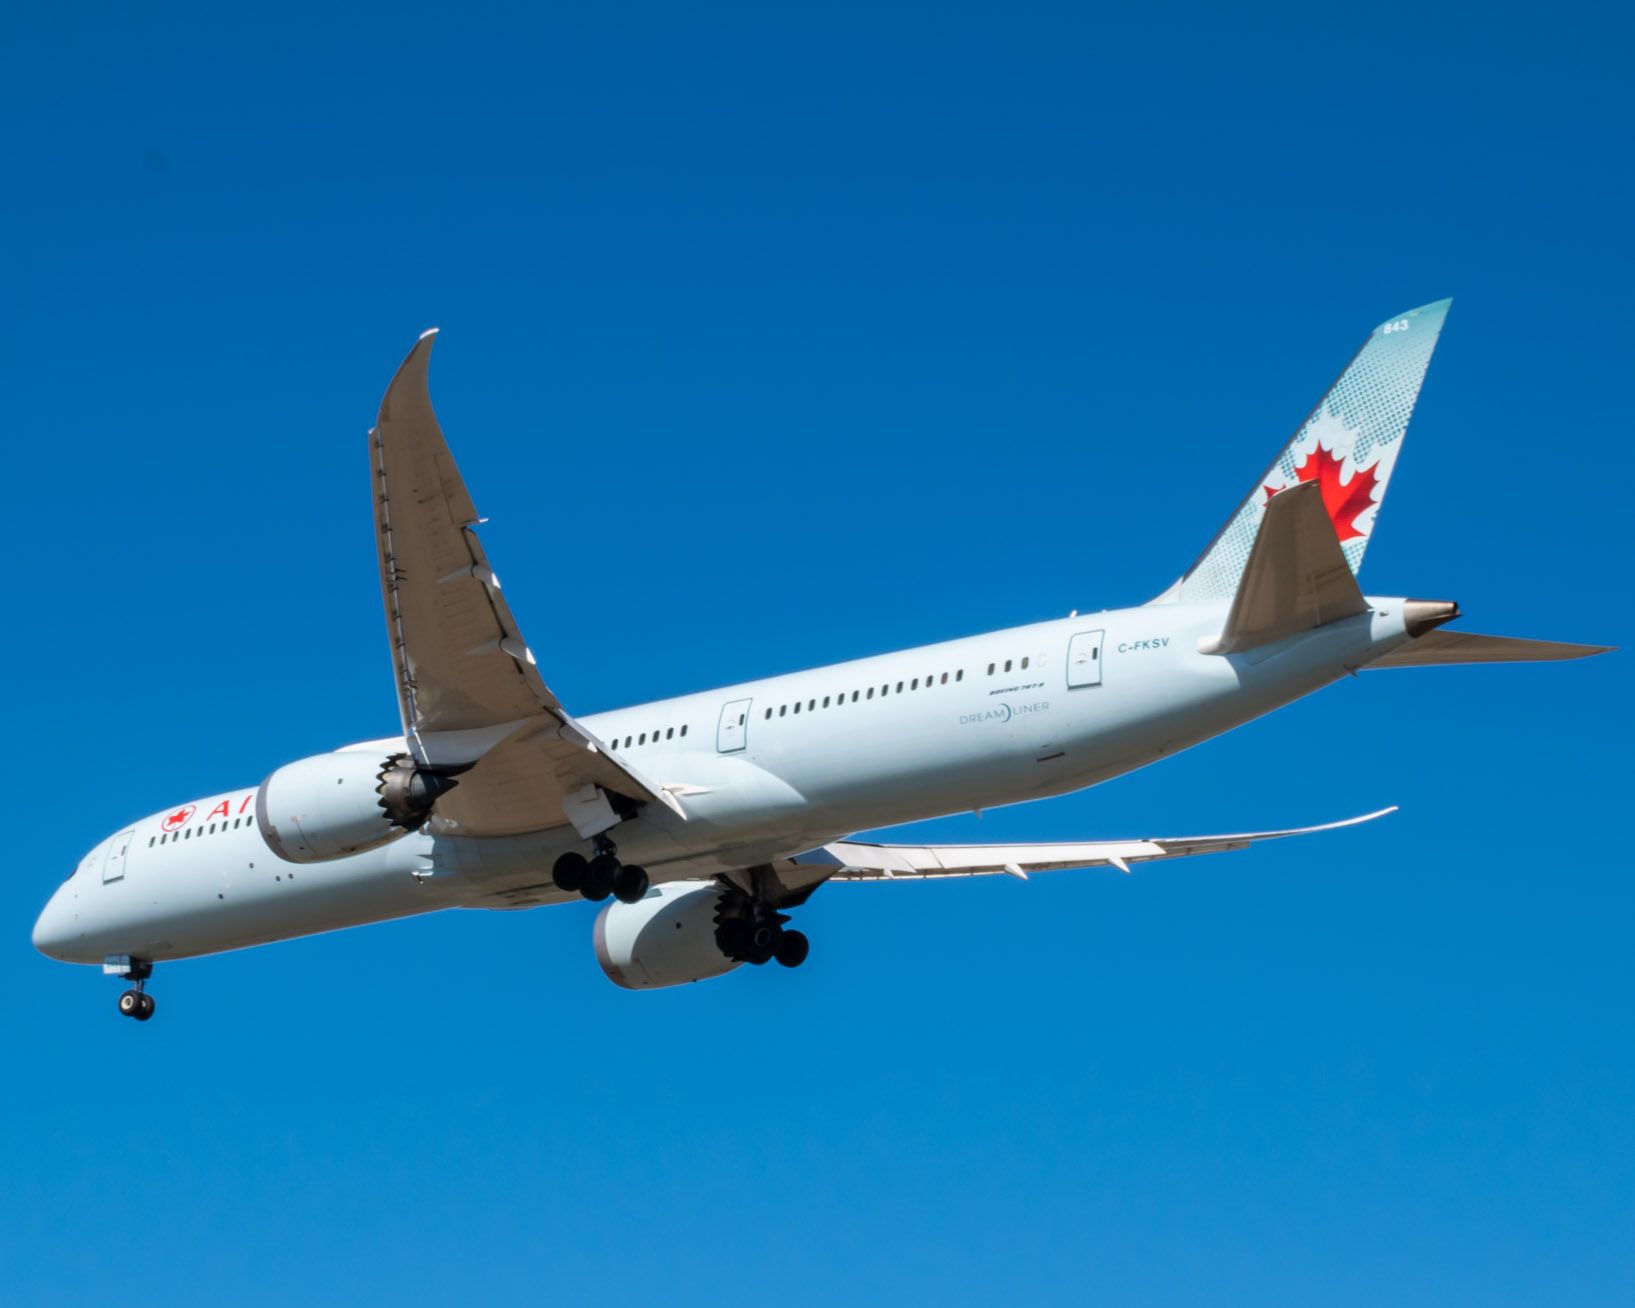 An Air Canada 787-9 Dreamliner on Final Under the YVR Blue Sky